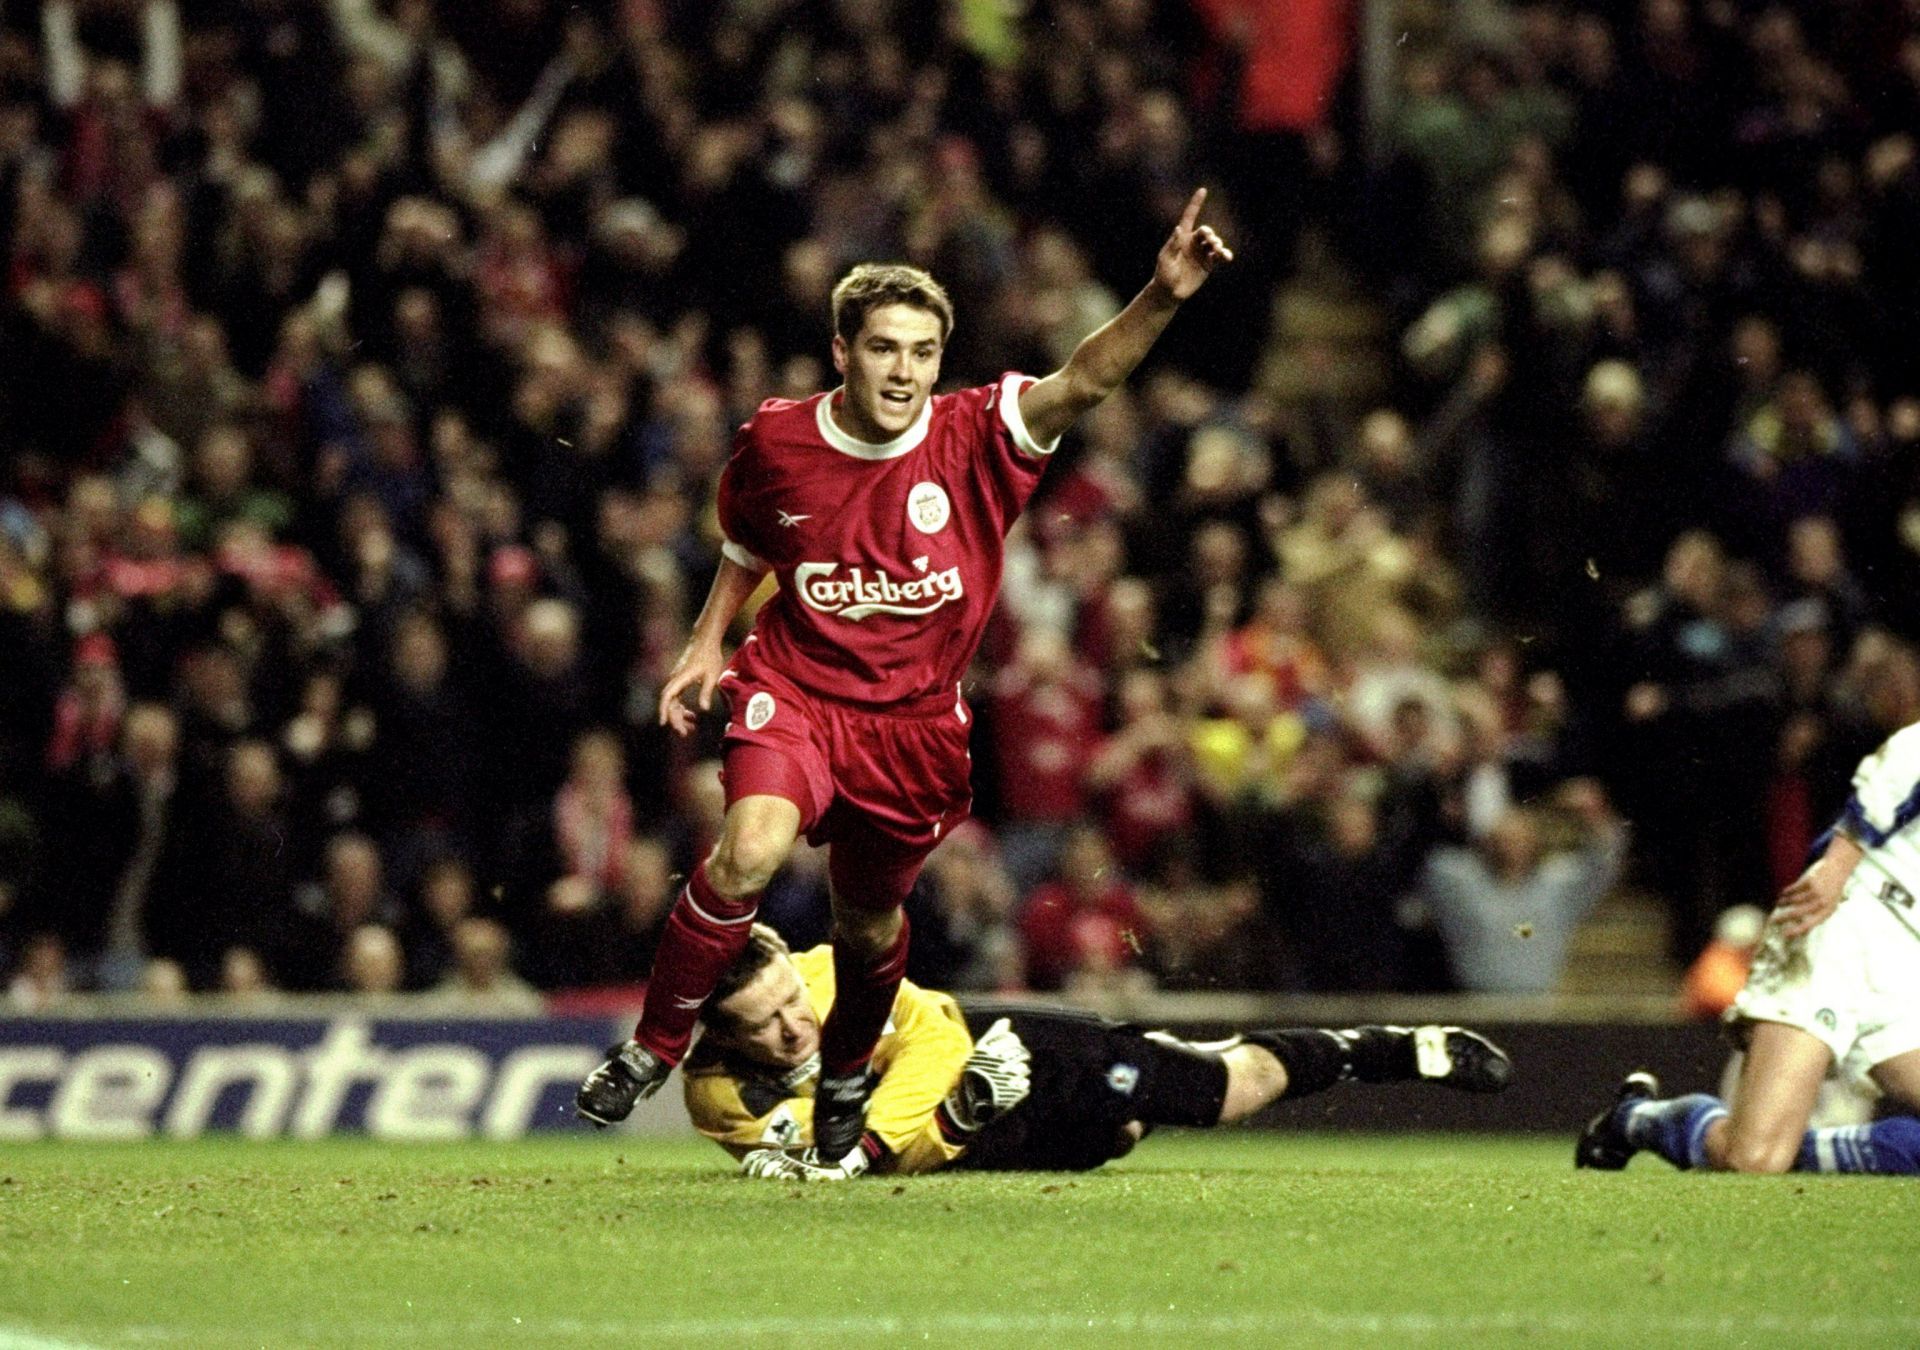 Michael Owen in action for Liverpool